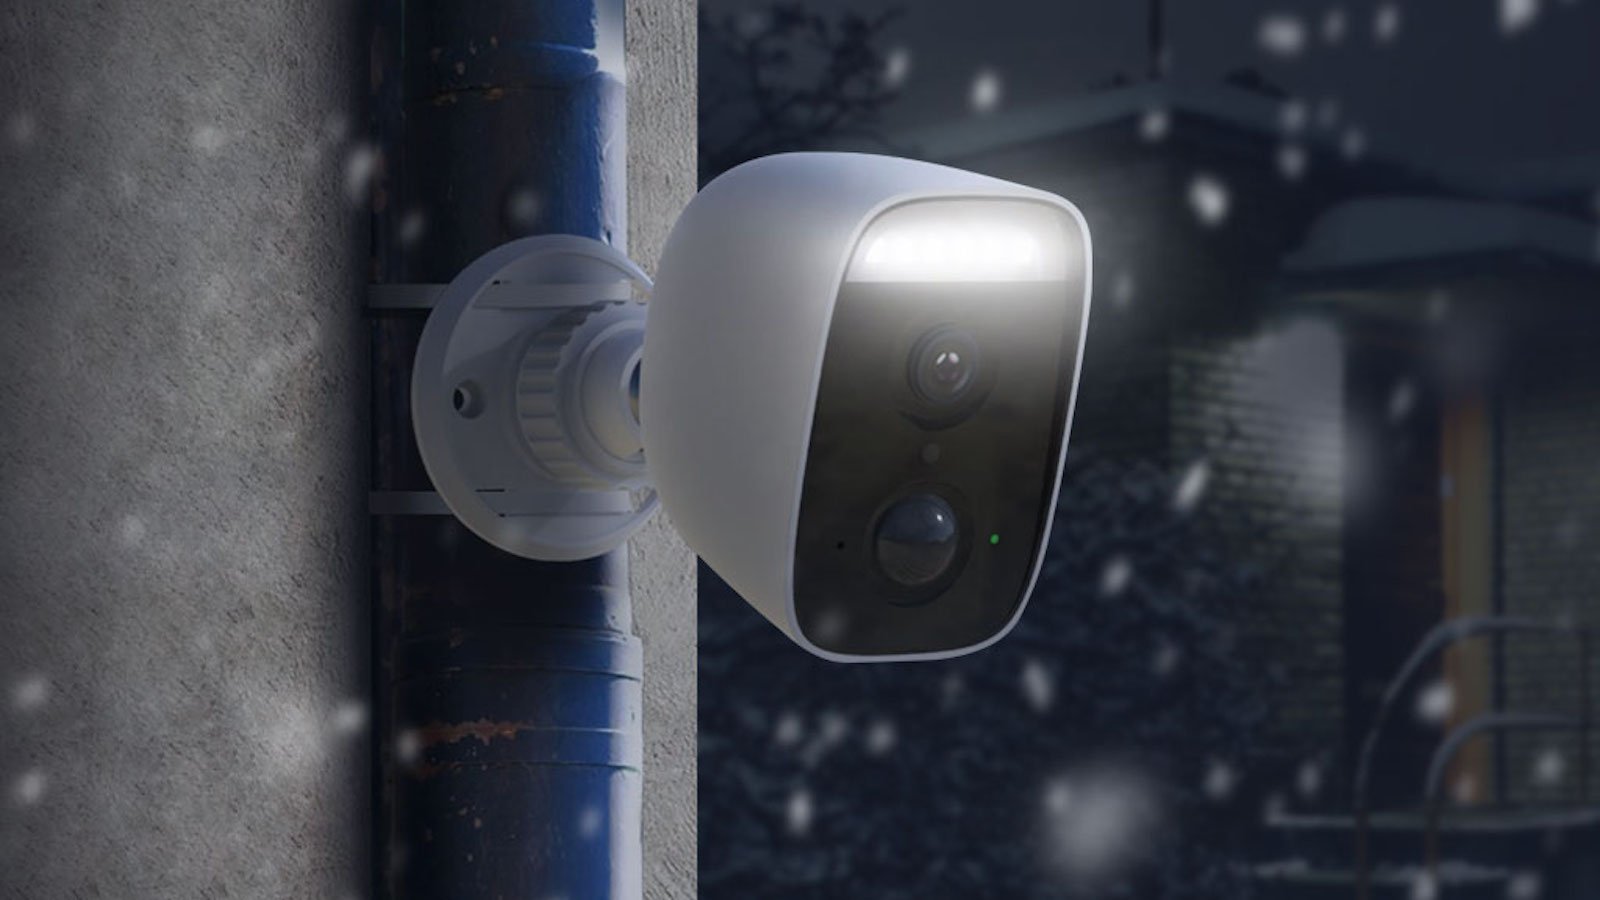 D-Link DCS-8630LH Spotlight Camera lets you monitor you house when you’re out